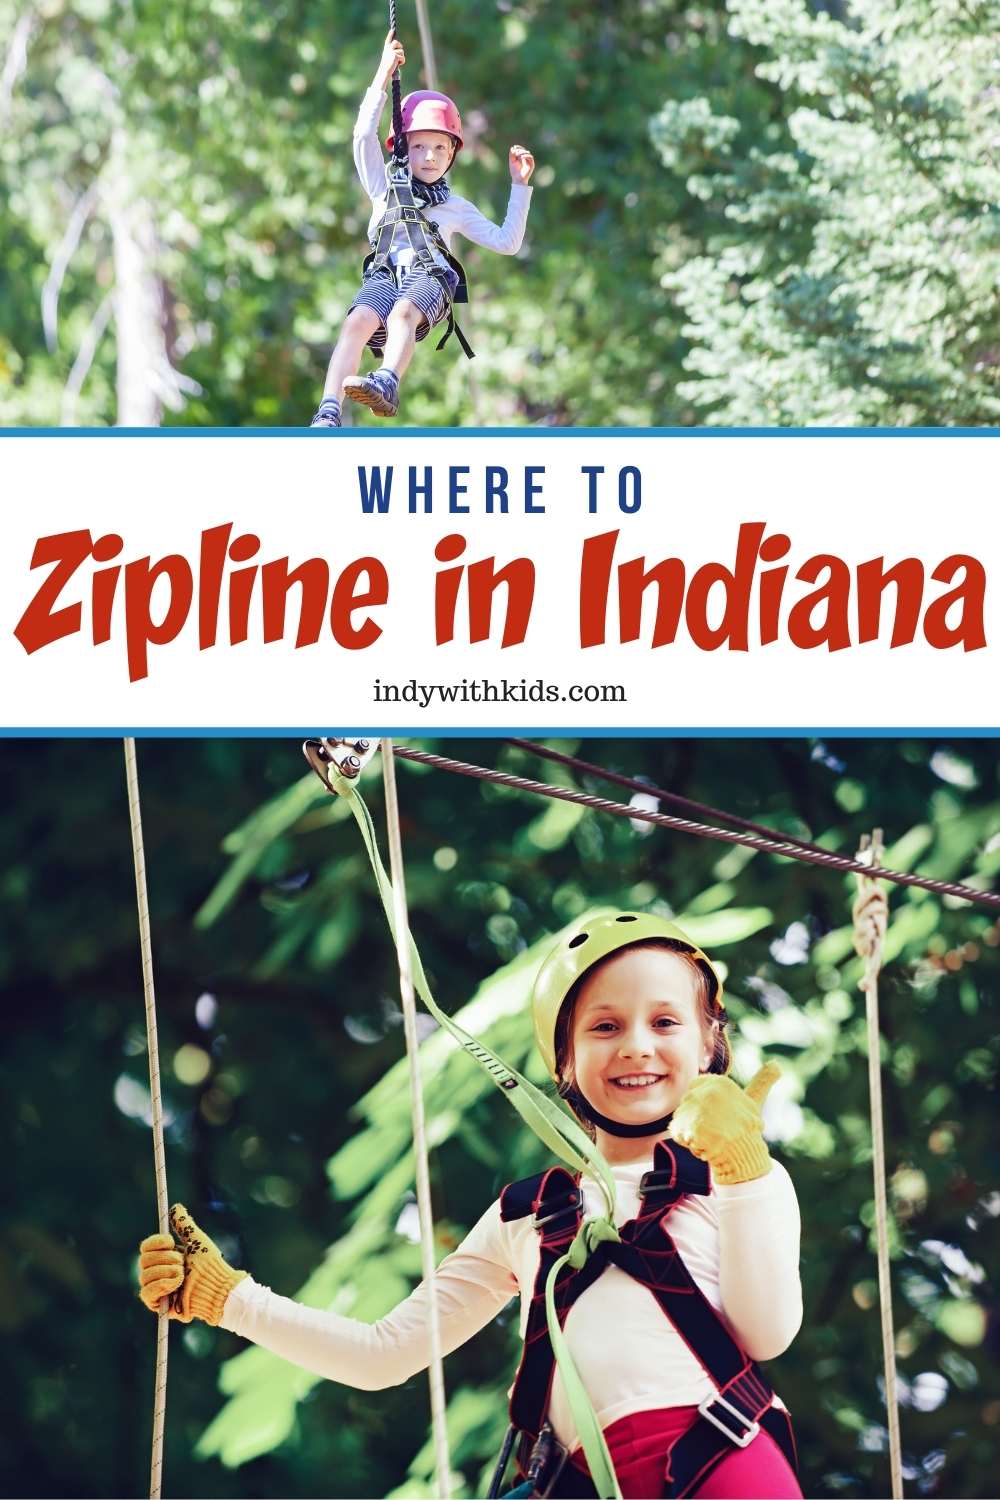 zip trip near indianapolis in